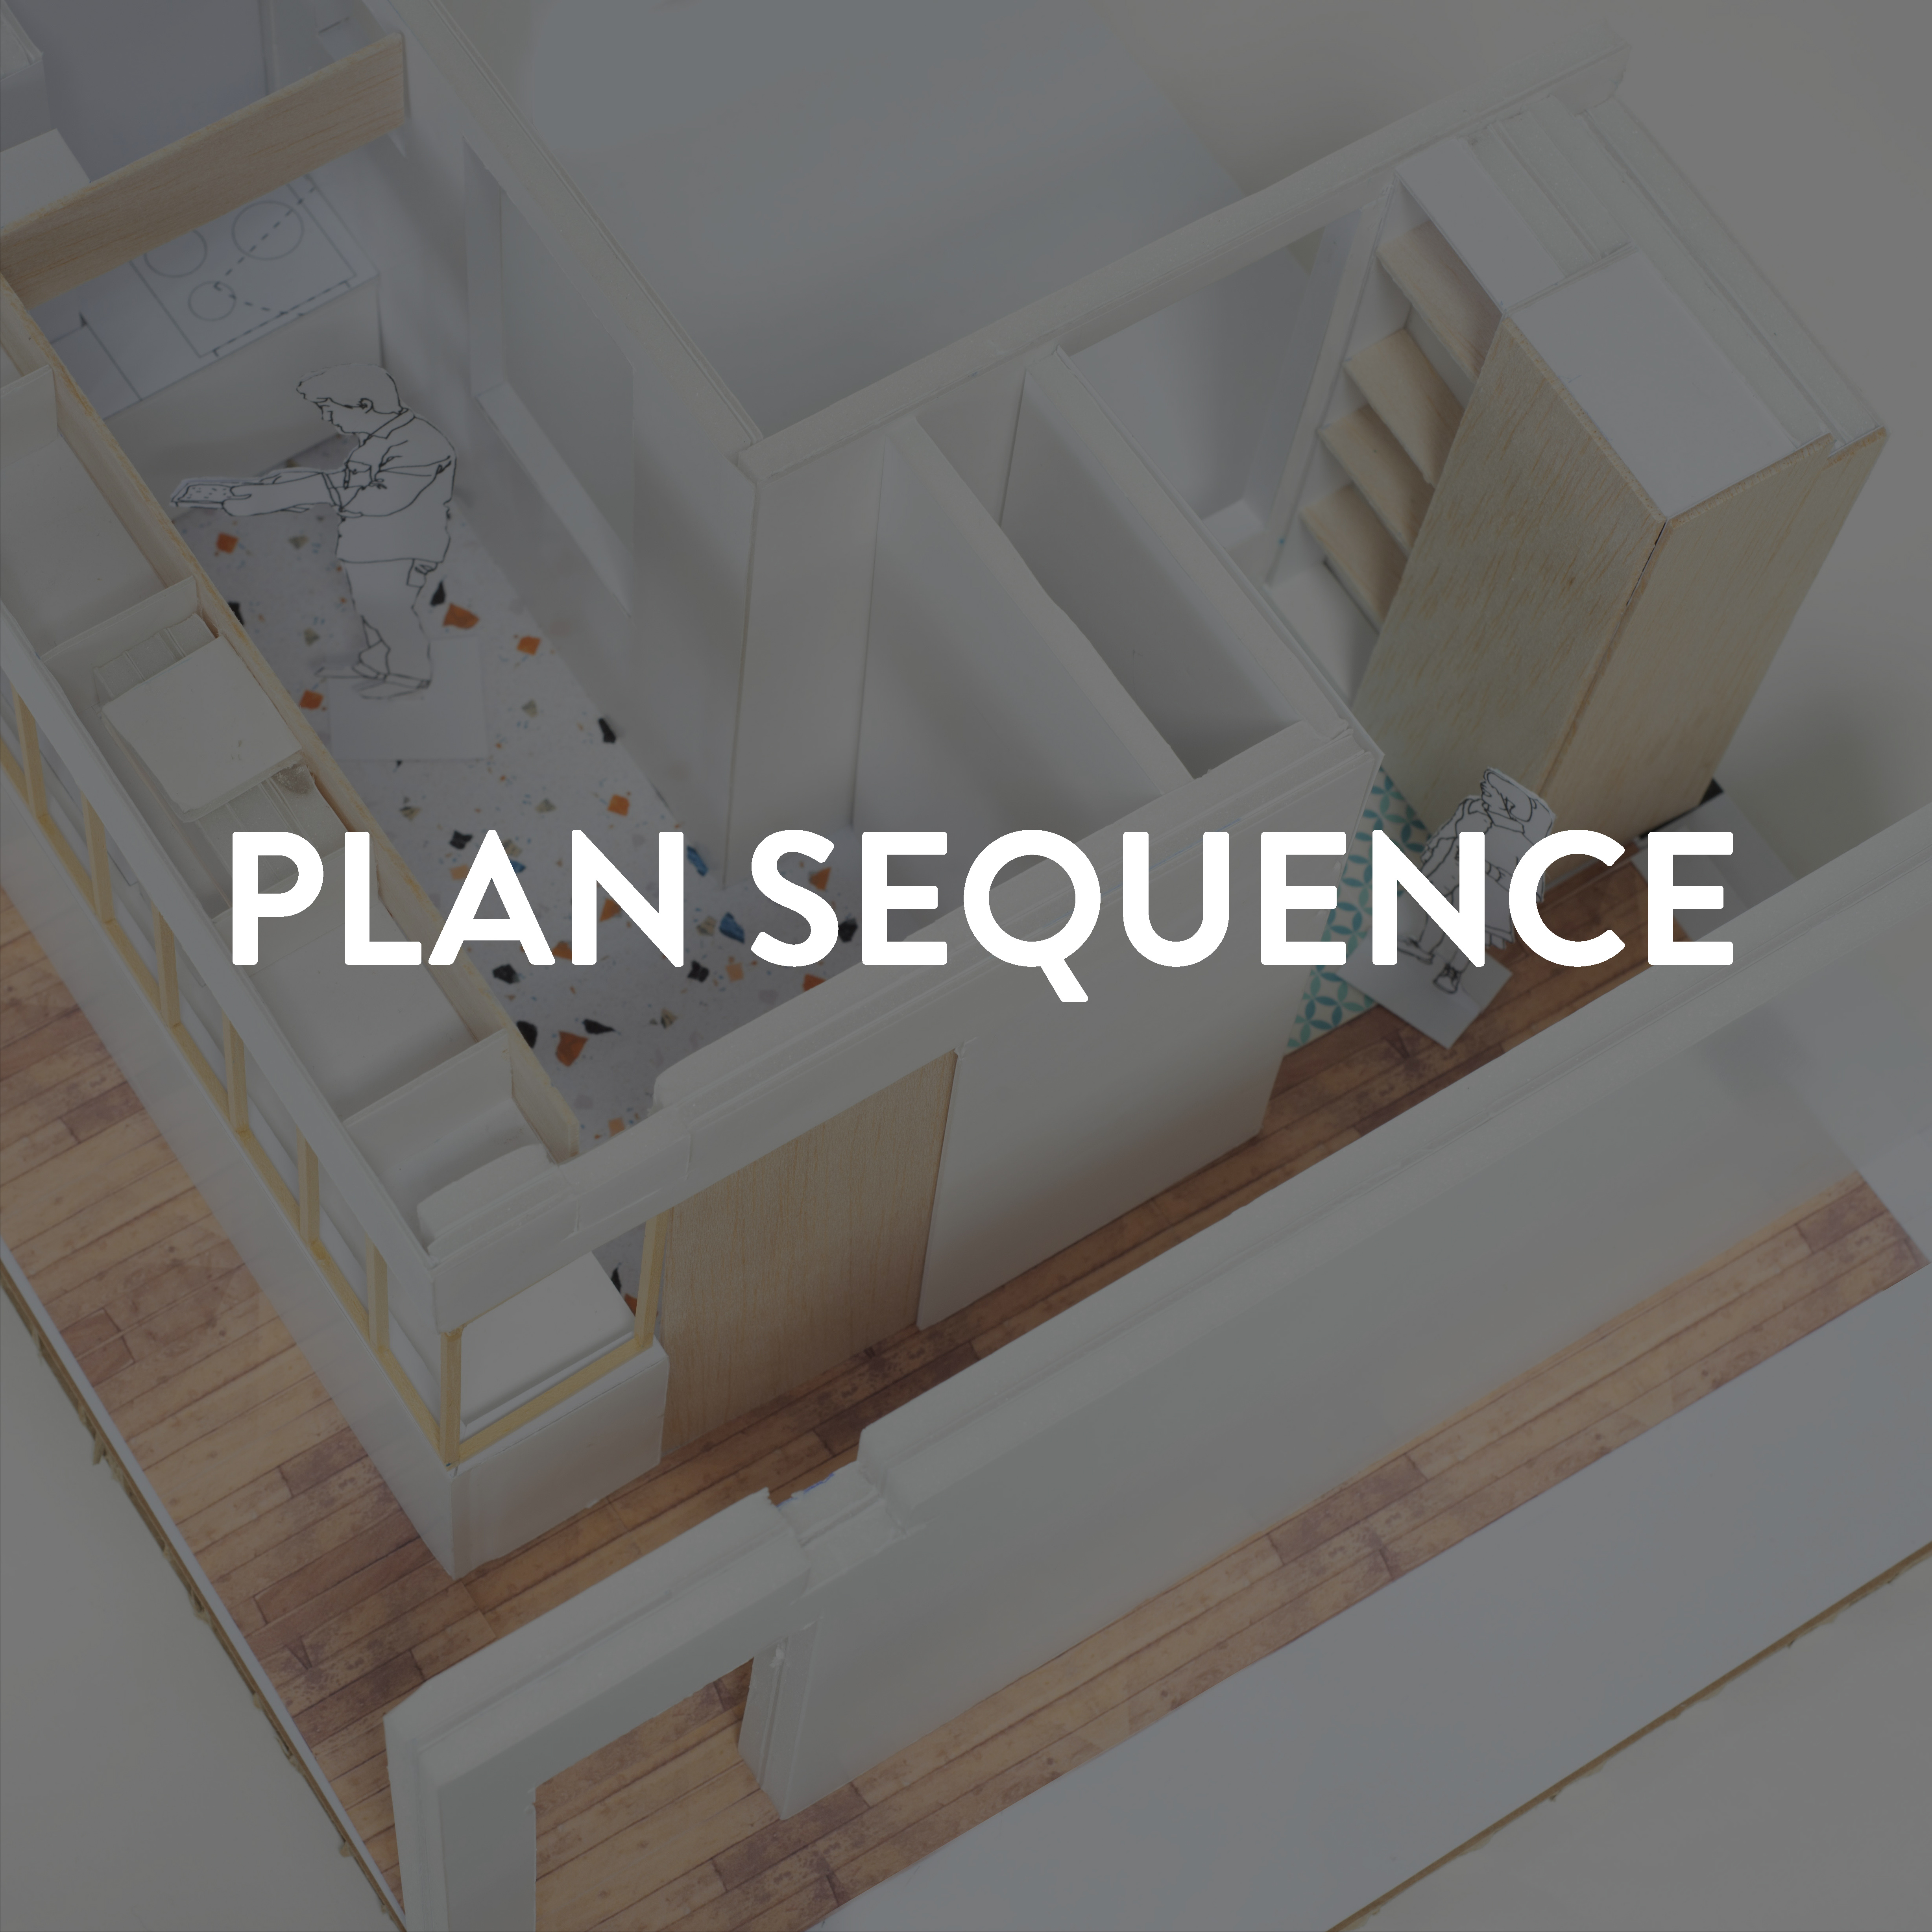 PLAN SEQUENCE